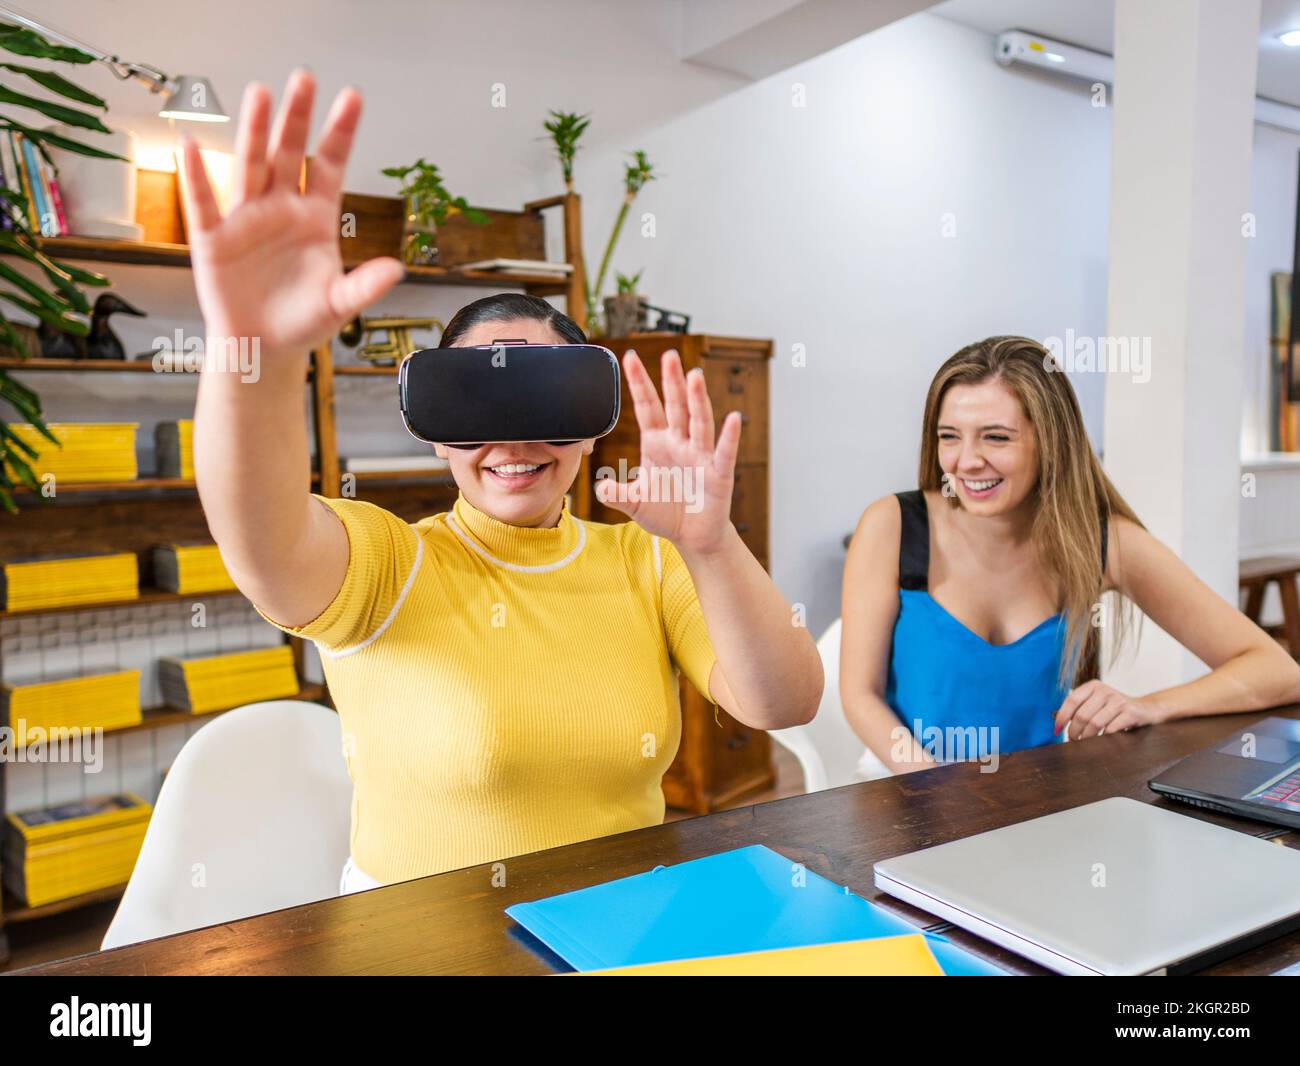 Smiling businesswoman gesturing with VR goggles sitting by friend at table Stock Photo